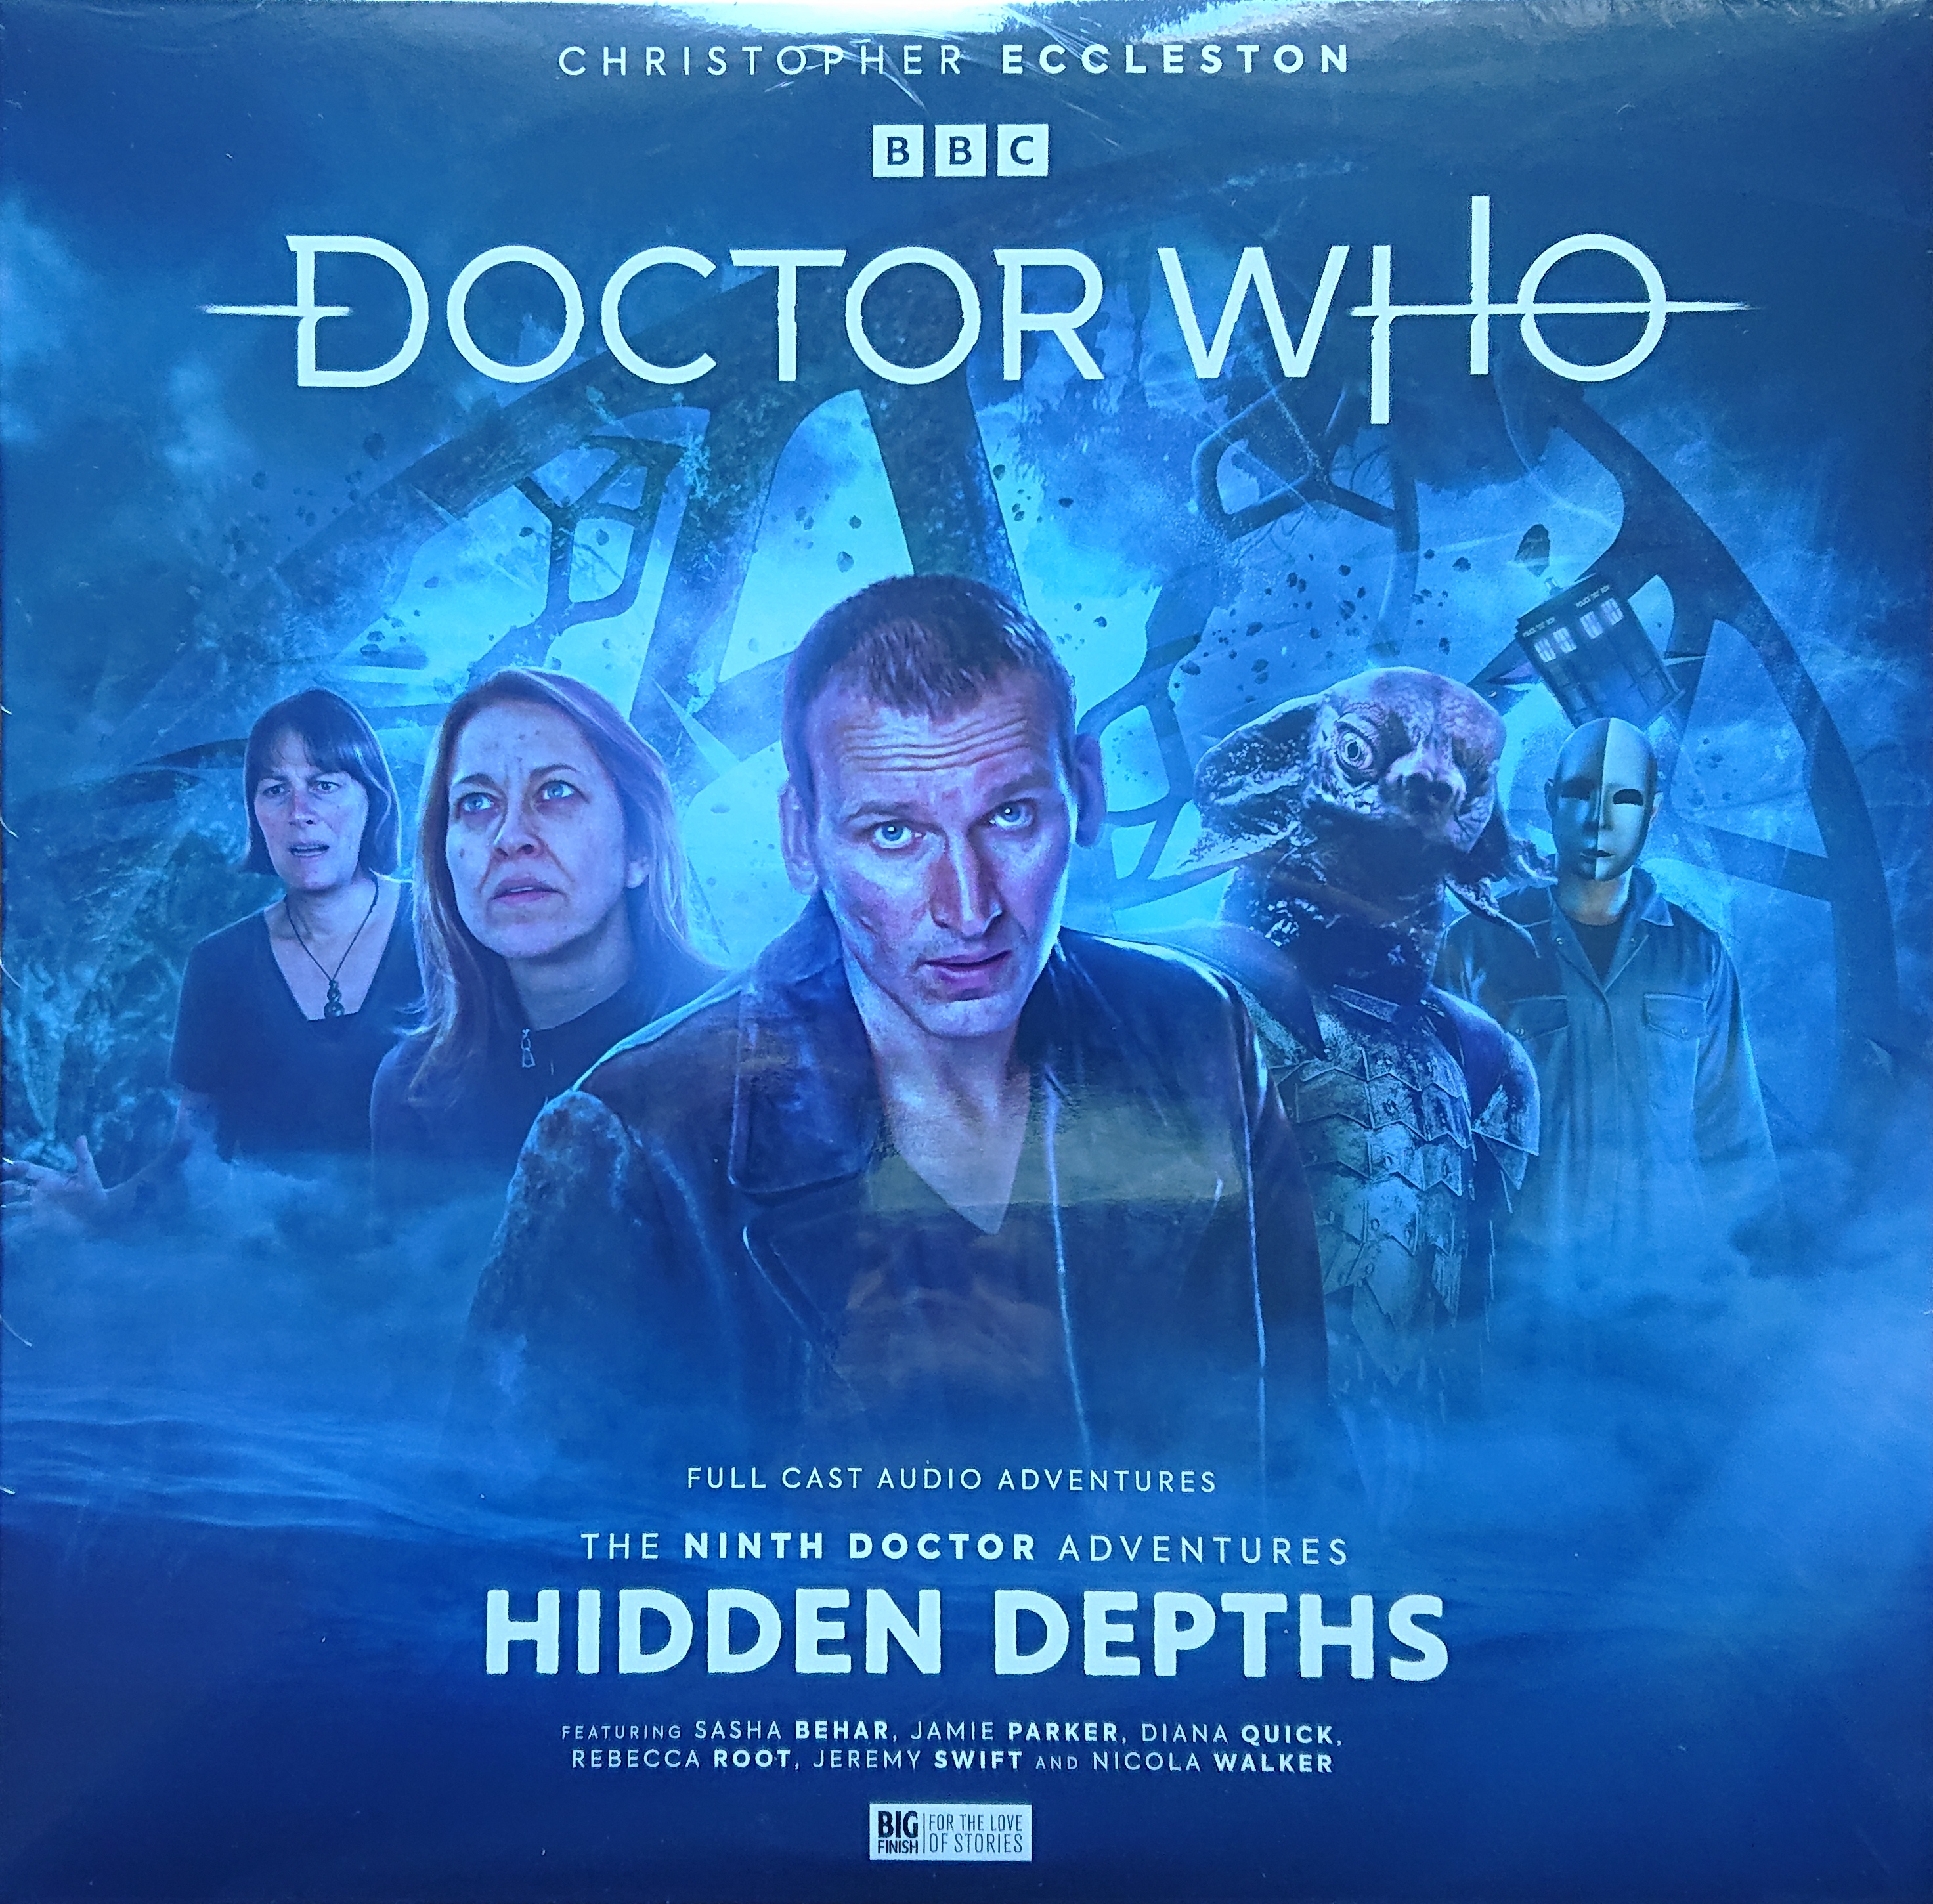 Picture of BFPDW9TH07V Doctor Who - The Ninth Doctor Adventures 2.3: Hidden depths by artist Lizbeth Myles / Lisa McMullin / John Dorney from the BBC records and Tapes library